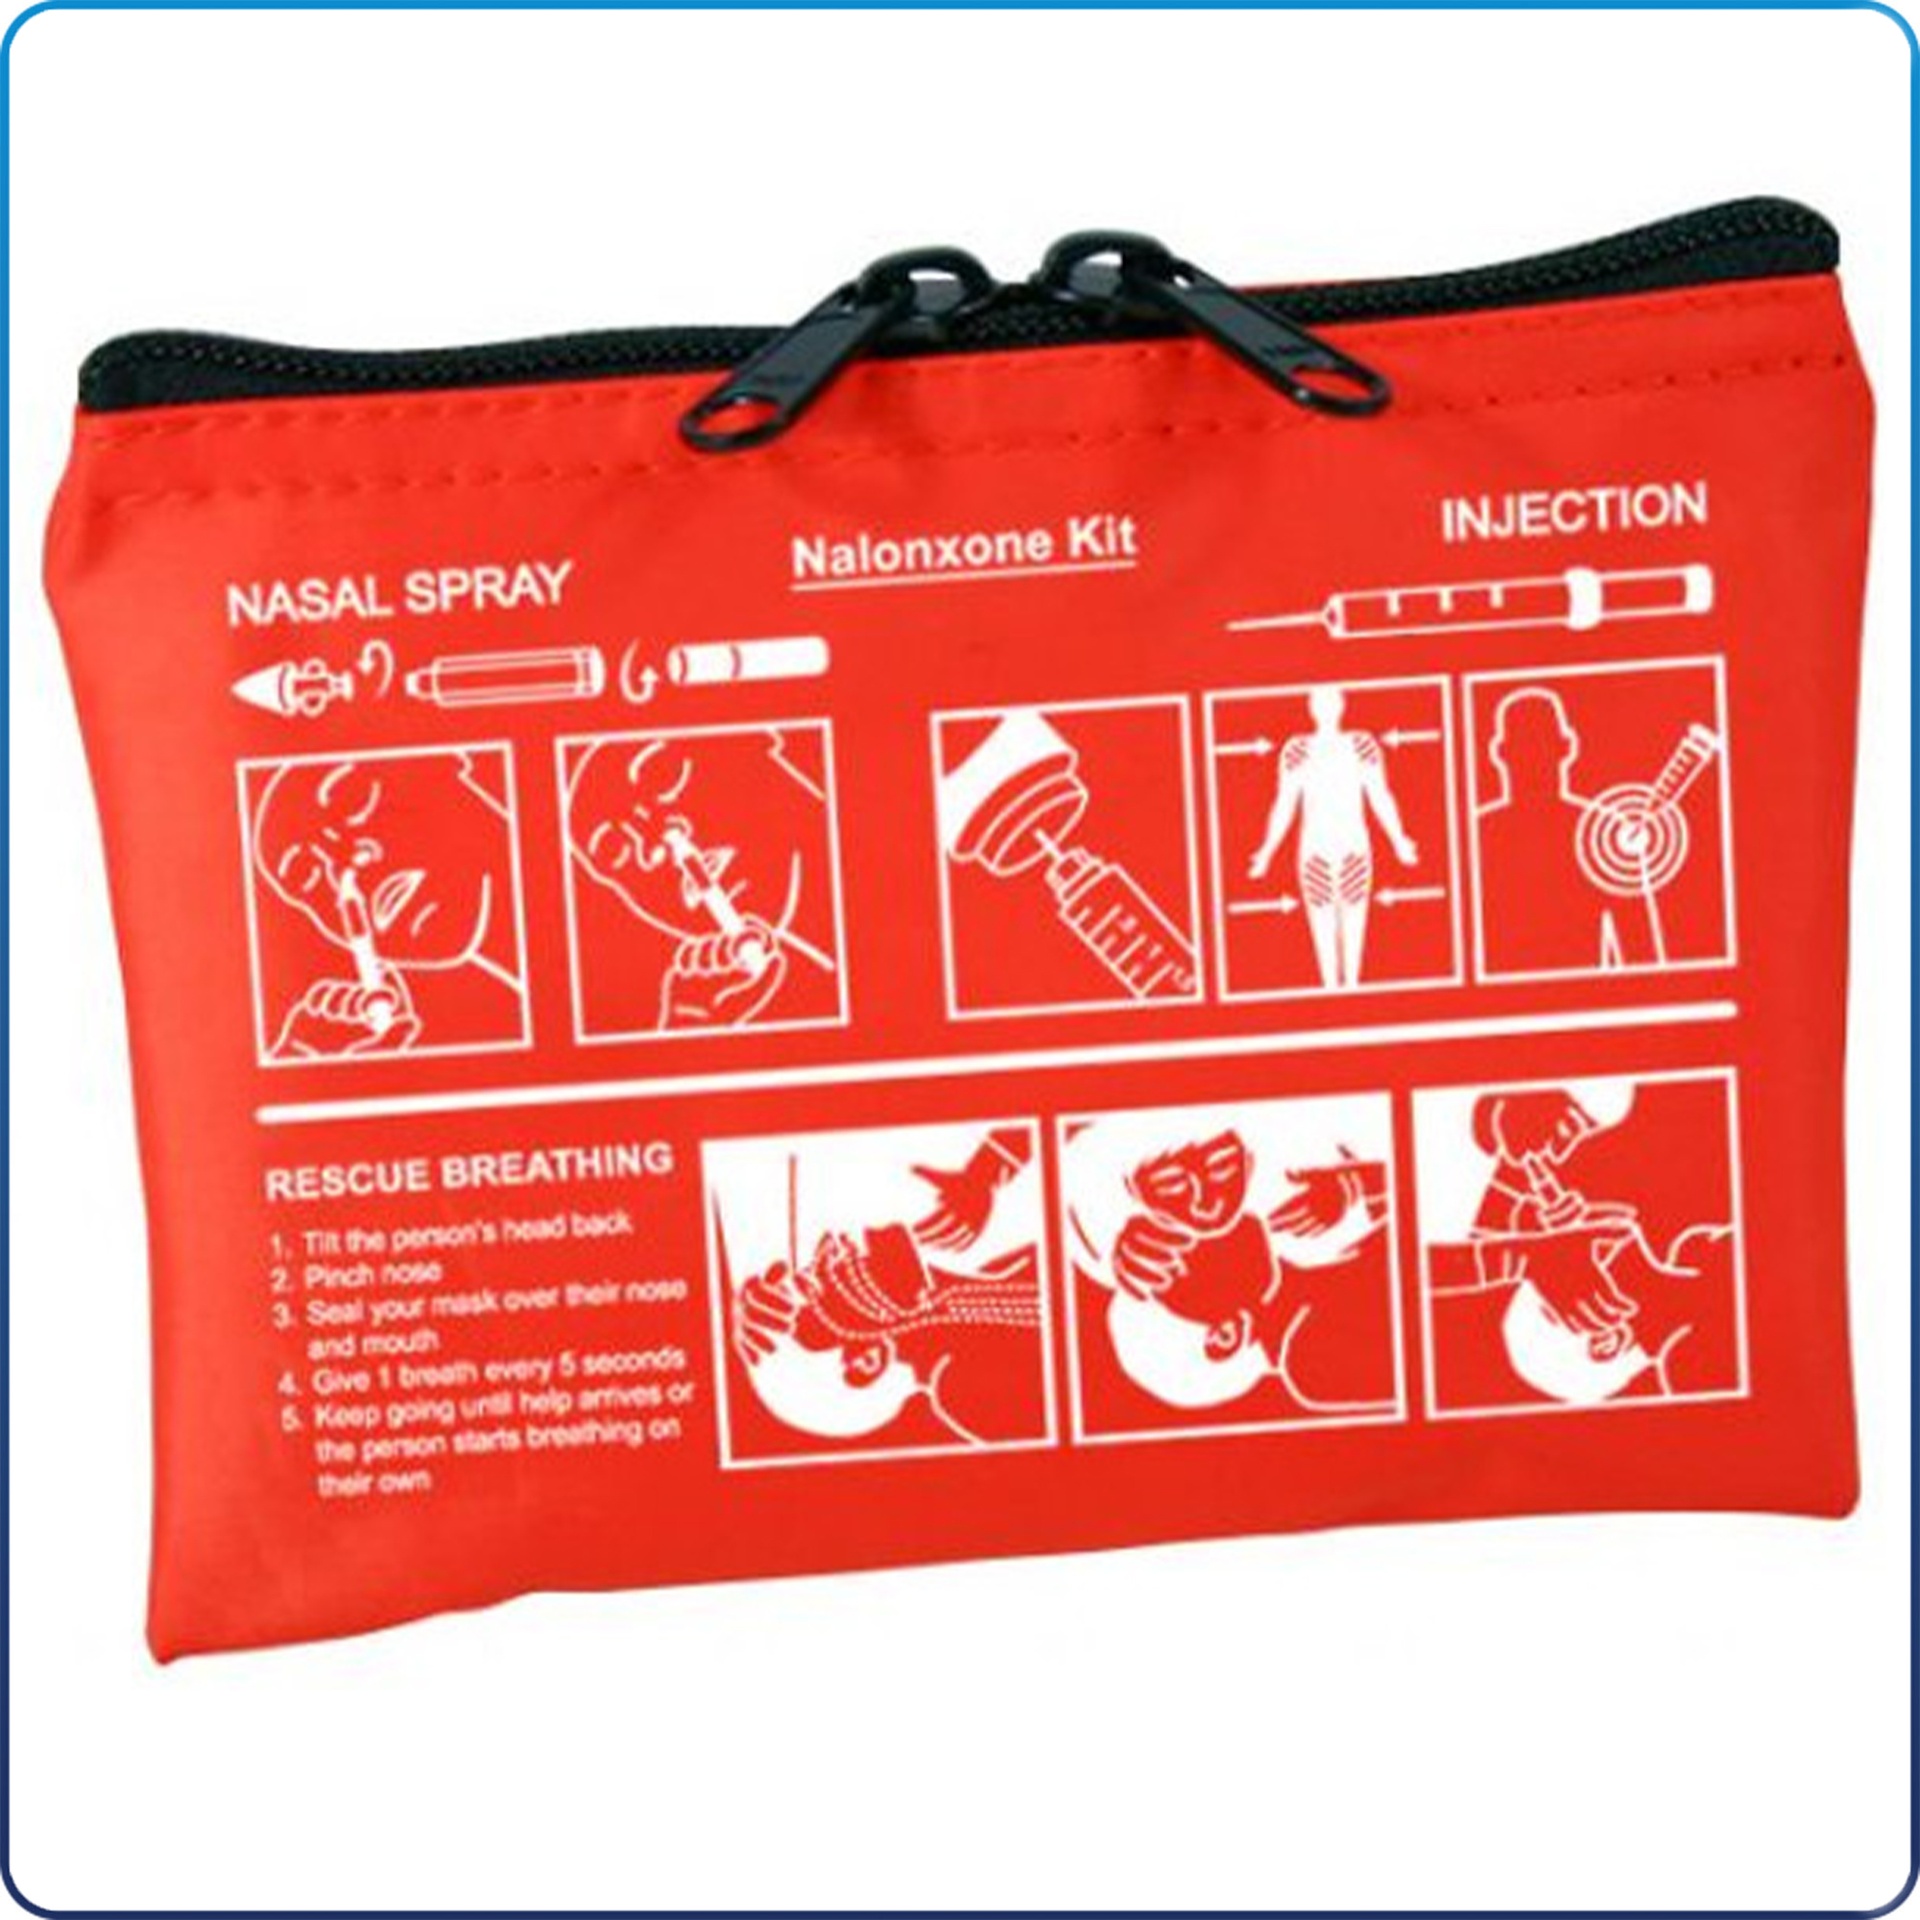 [NXKIT] EMS Narcan Kit Pouch w/ Instruction Pictograph